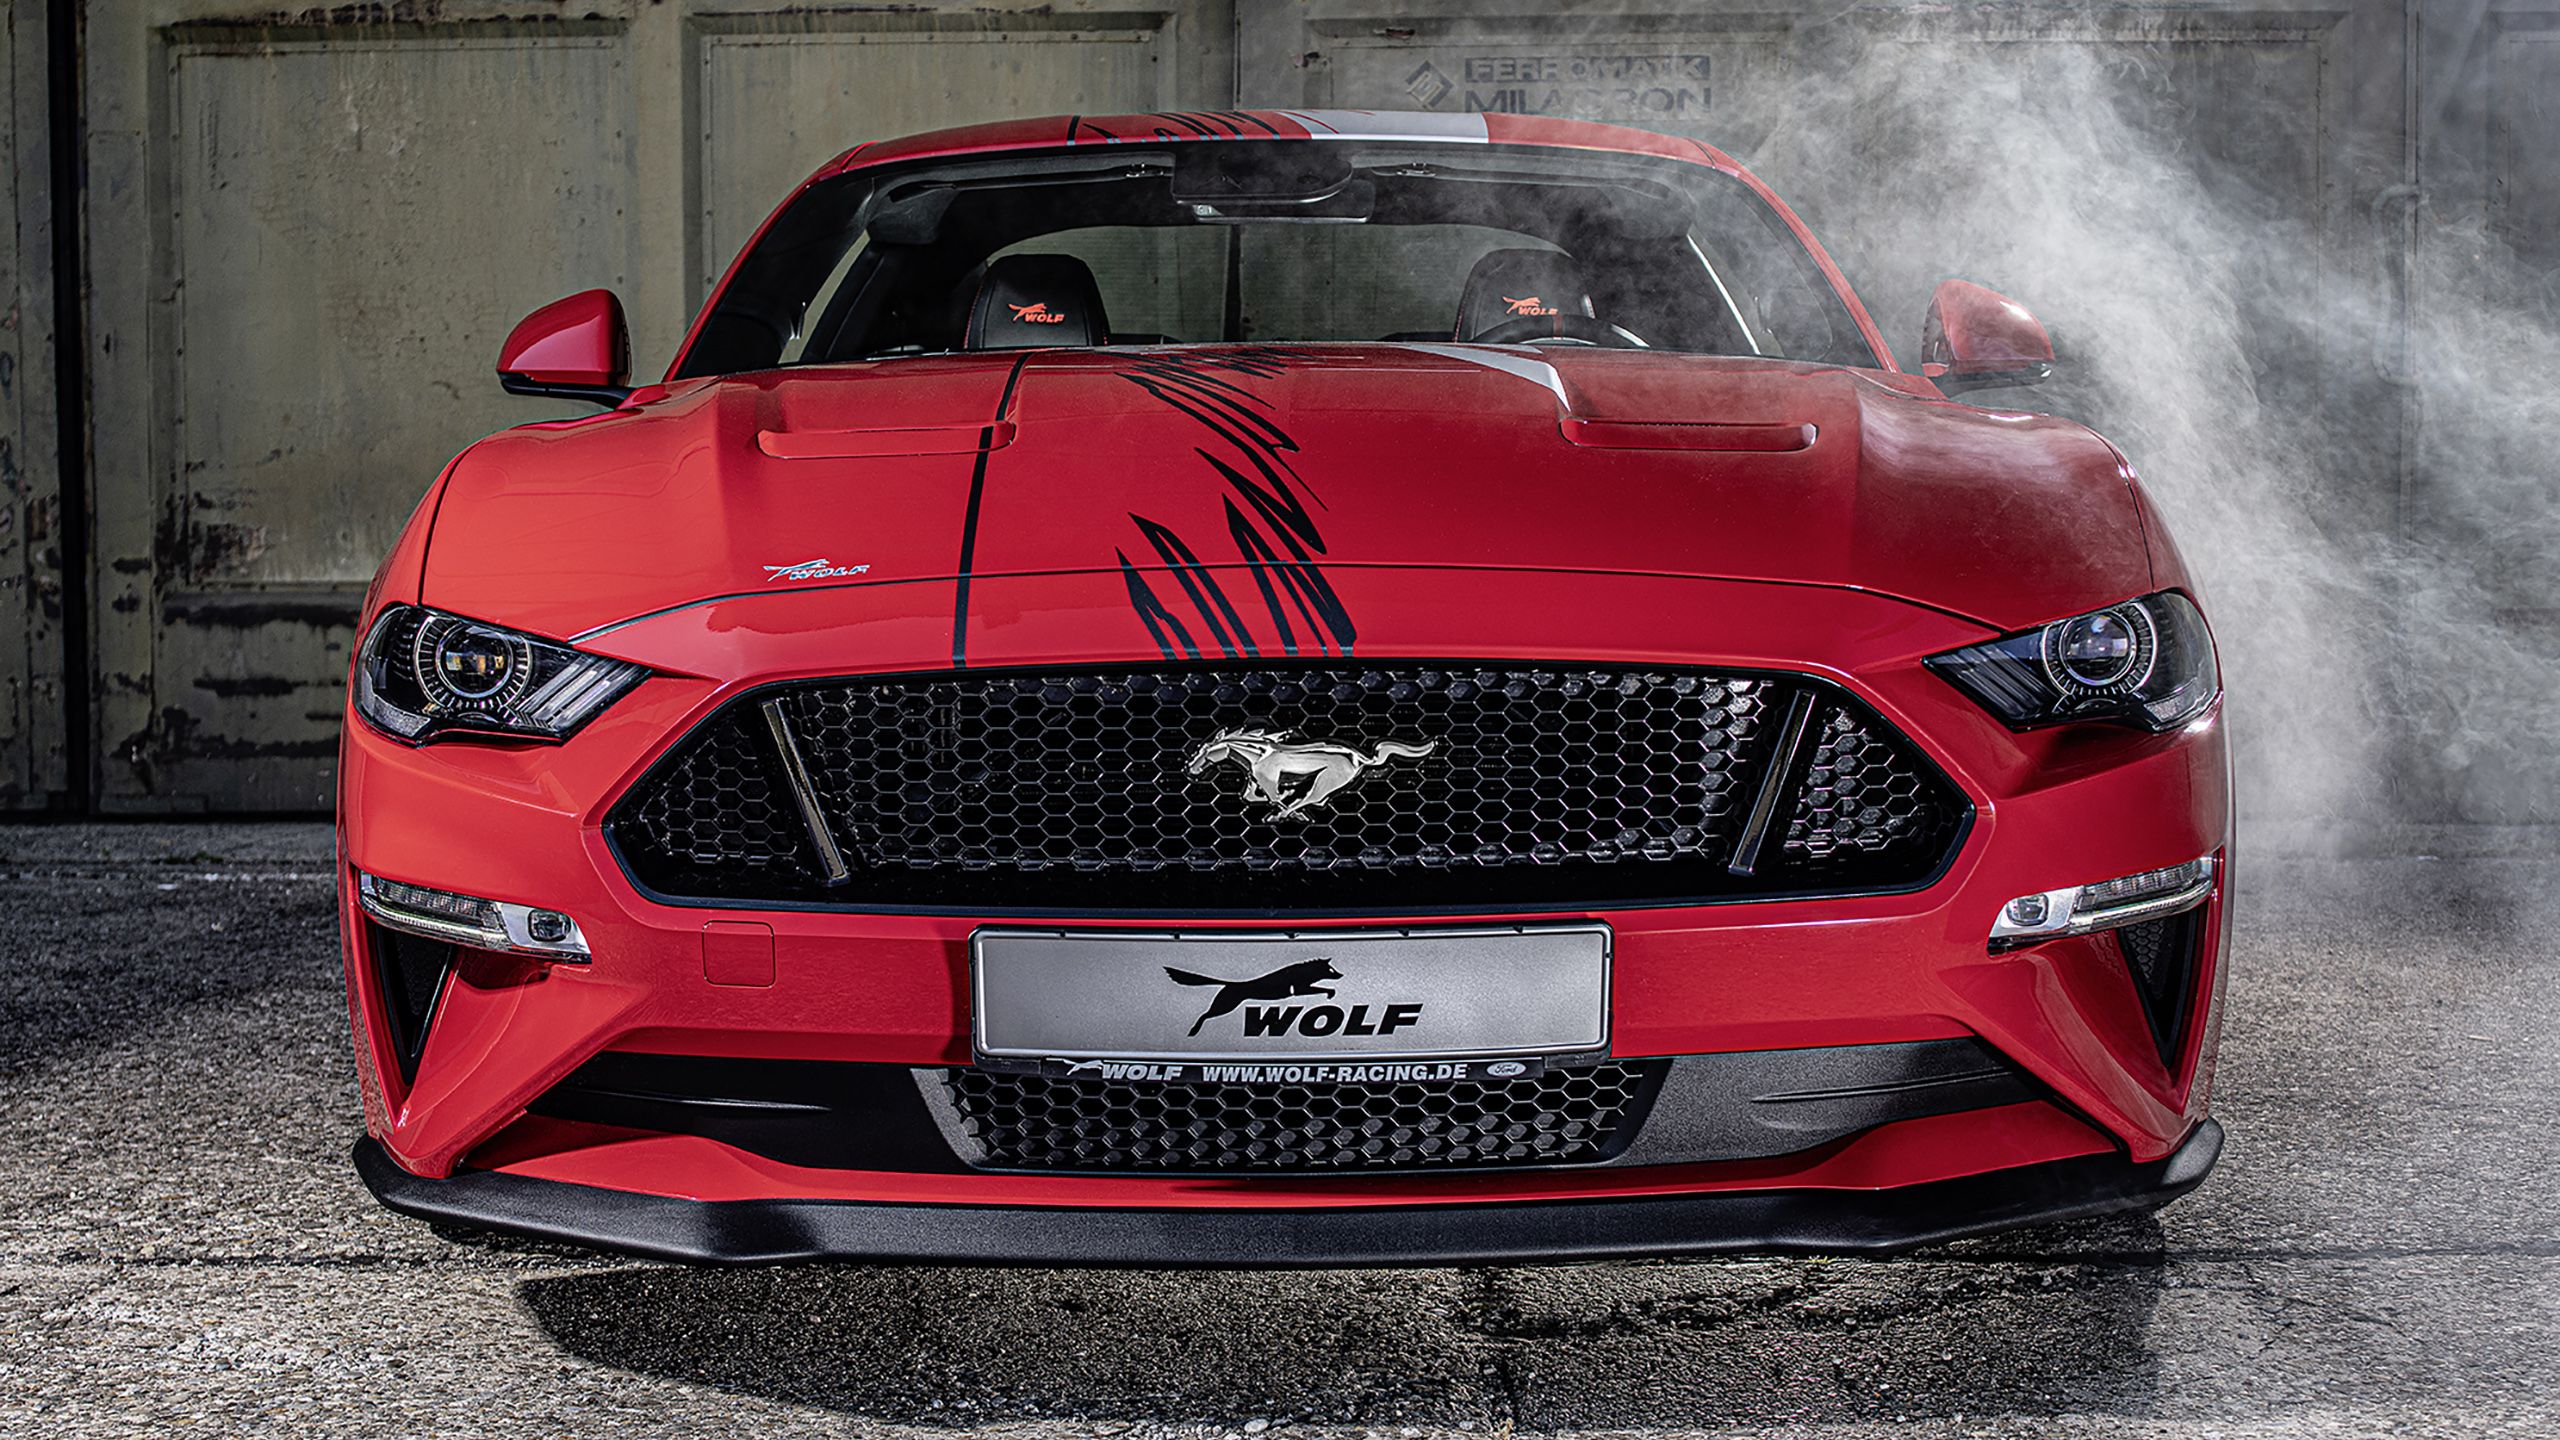 Wallpaper of Car, Ford Mustang GT, Muscle Car, Red, Smoke